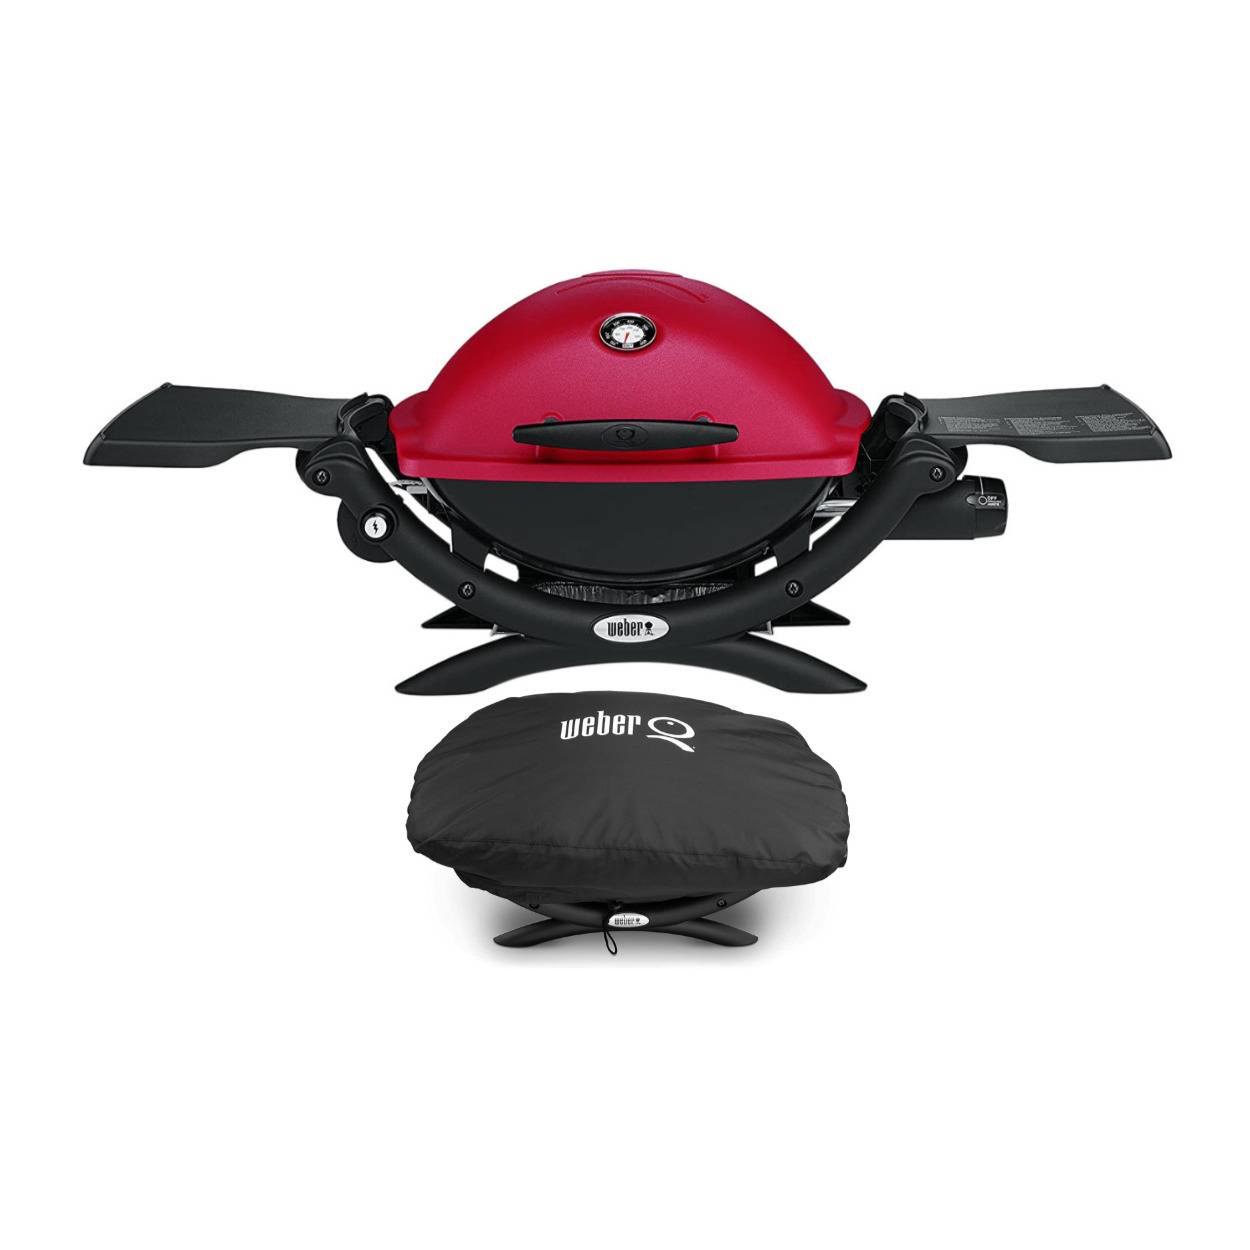 Weber Q 1200 Liquid Propane Grill (Red) with Grill Cover